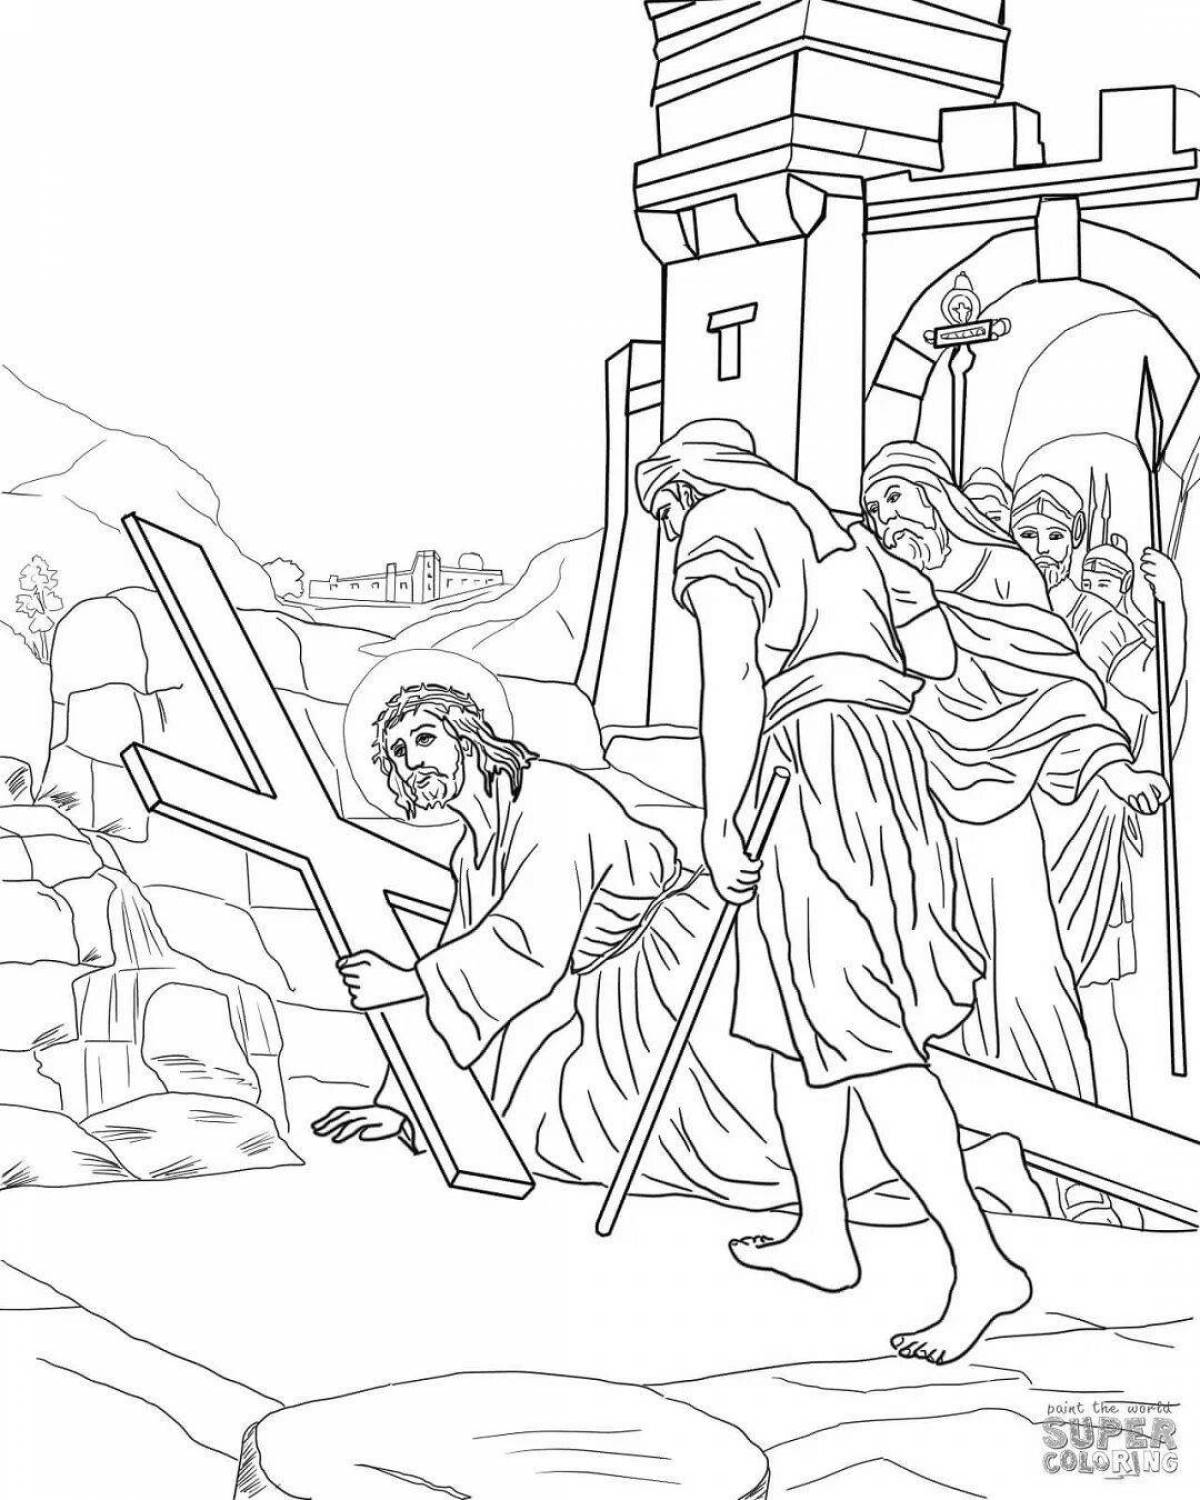 Jolly jesus coloring pages for kids